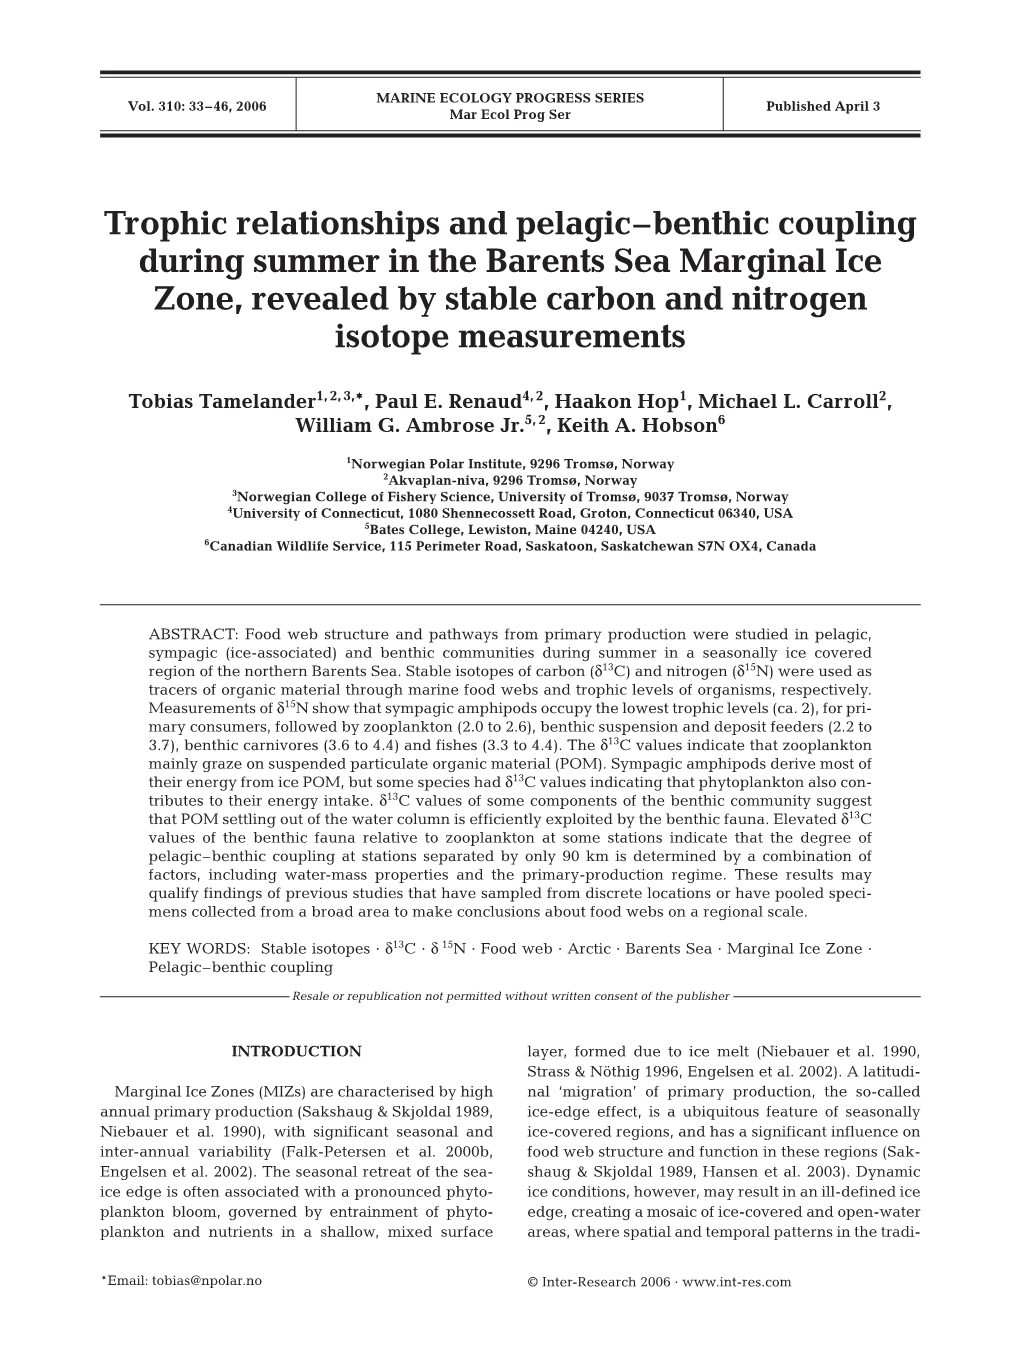 Trophic Relationships and Pelagic–Benthic Coupling During Summer in the Barents Sea Marginal Ice Zone, Revealed by Stable Carbon and Nitrogen Isotope Measurements